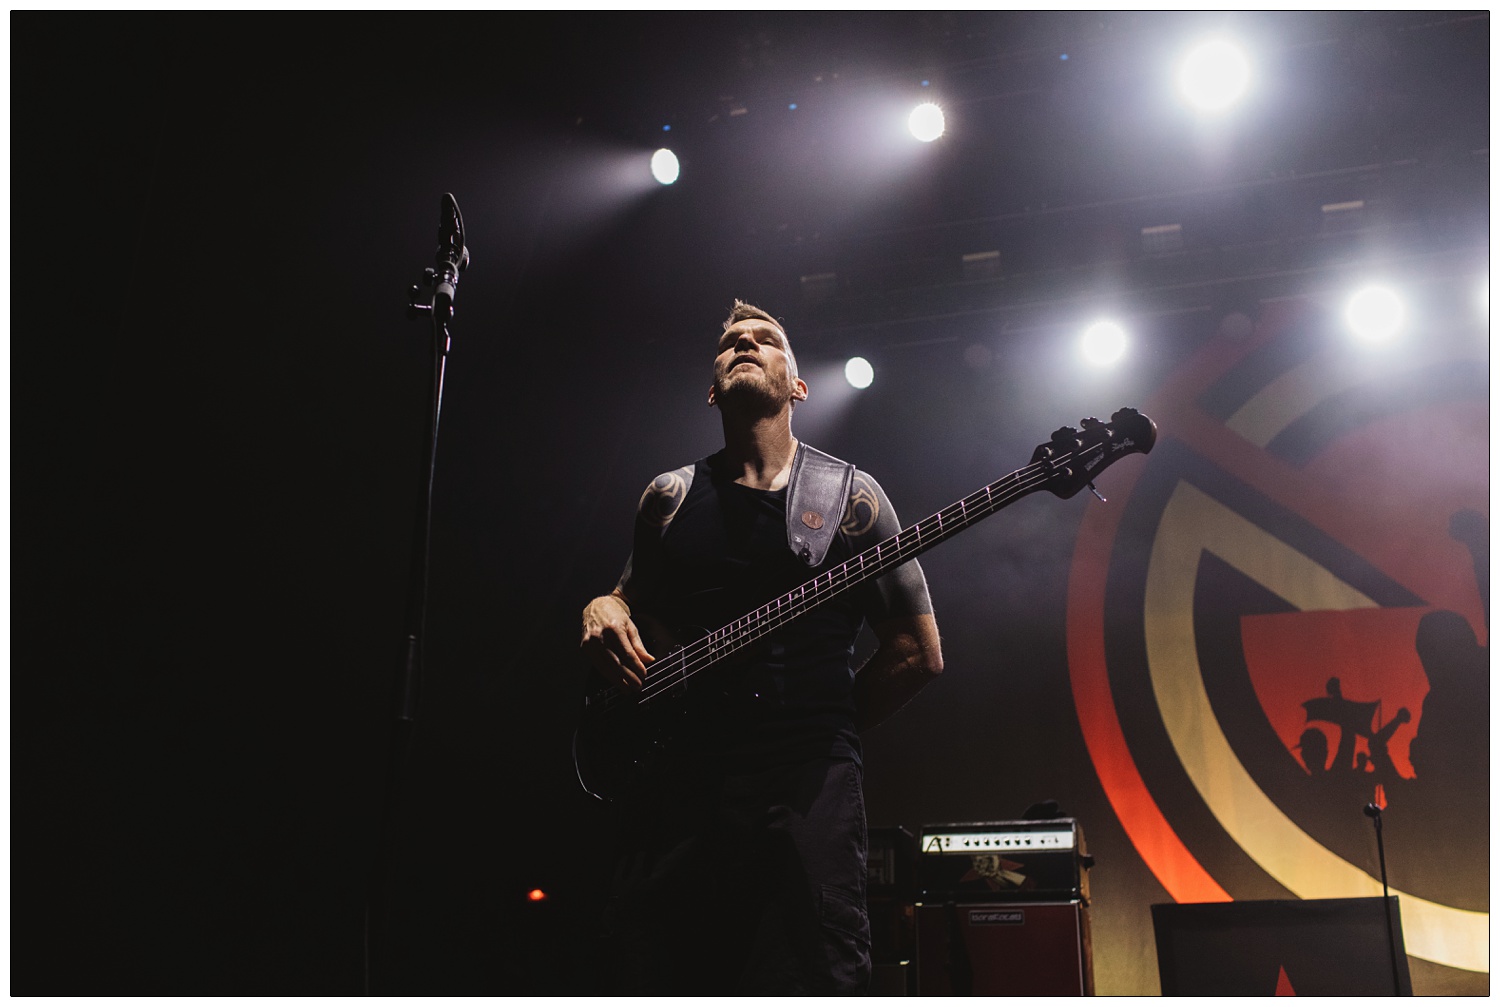 Tim Commerford on bass on stage at the Brixton Academy.